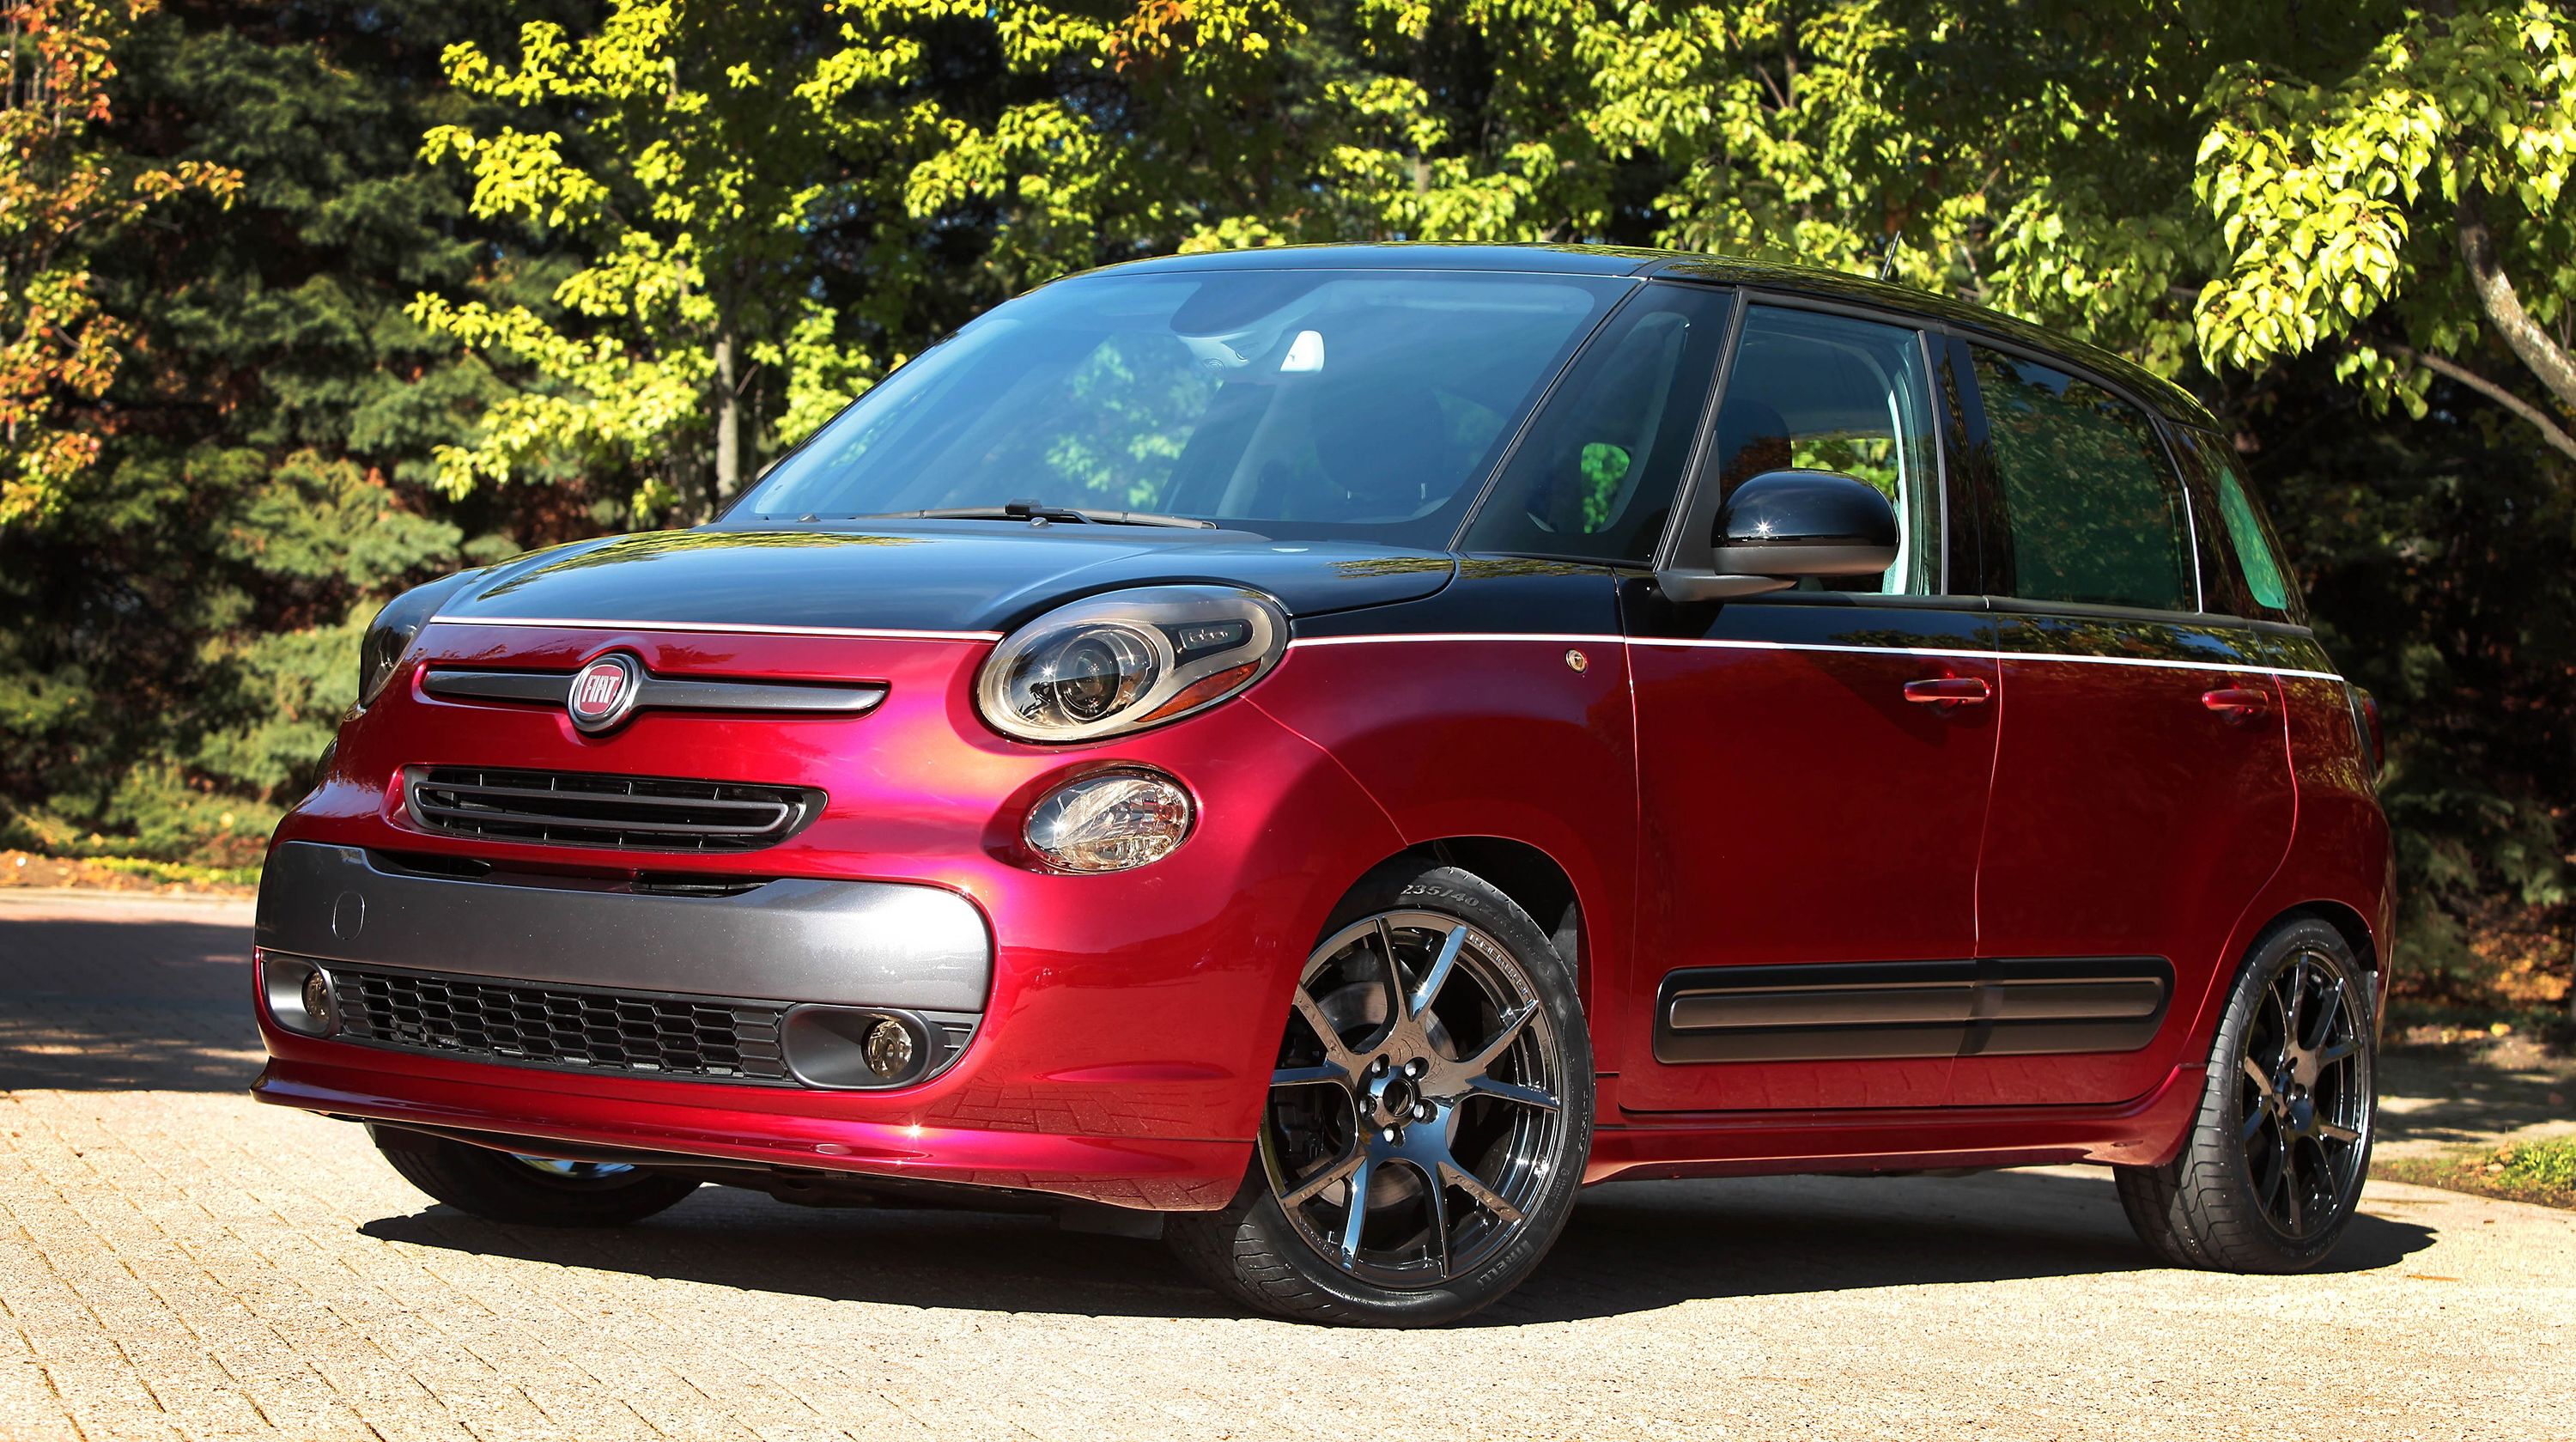  Fiat's heading to SEMA with this funky, two-tone 500L.